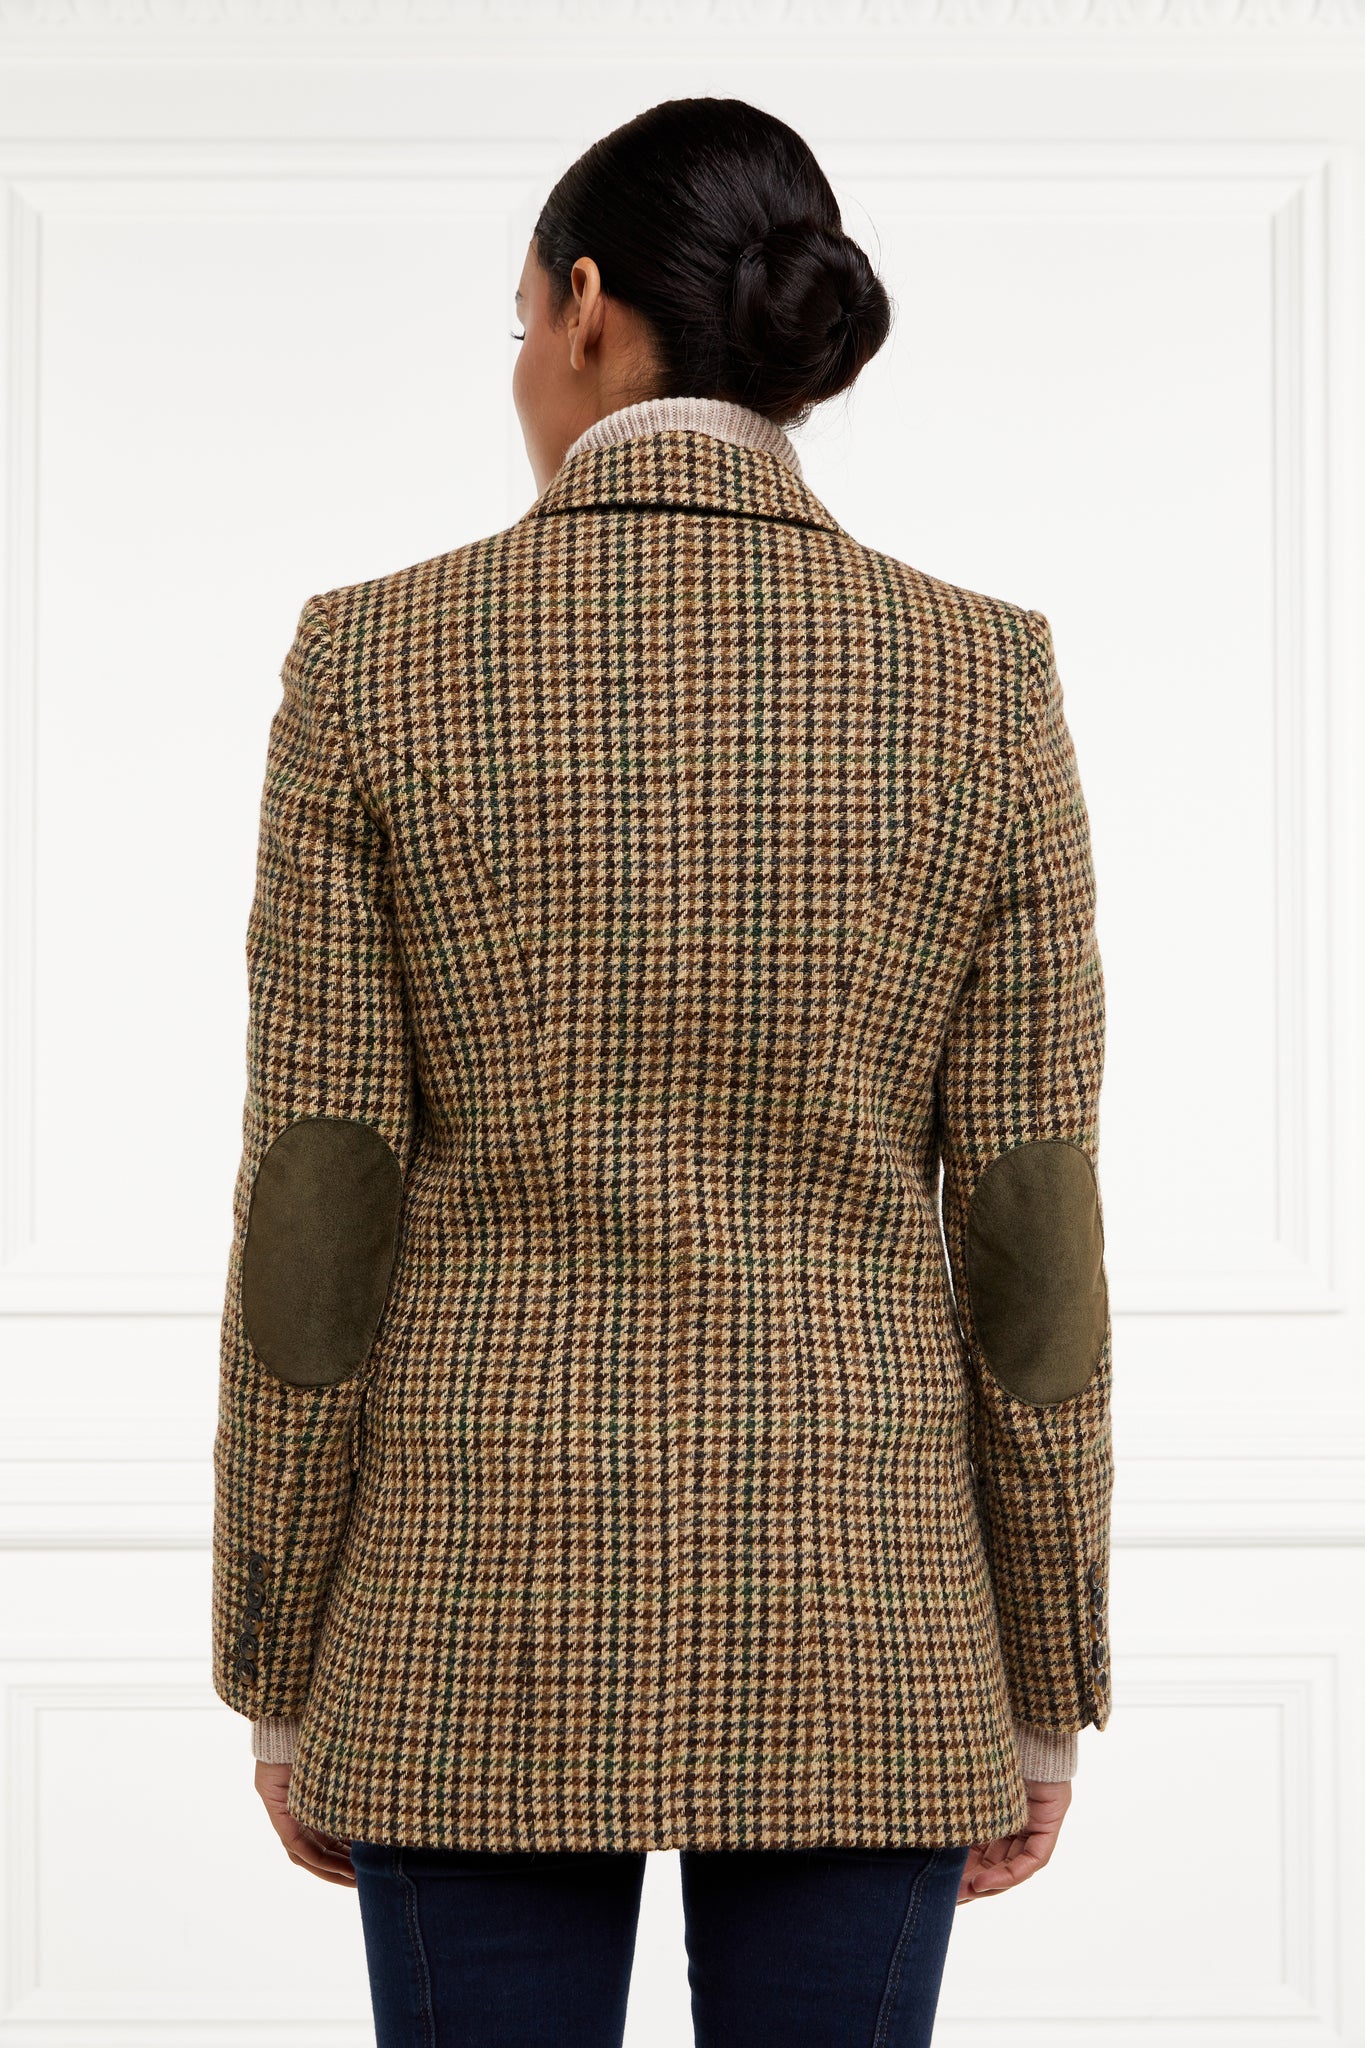 back of womens classic slim fit single breasted blazer in green tan and brown houndstooth tweed with lower patch pockets with concealed button flap contrast khaki suede shoulder gun patch with elbow patches and horn button finish on cuffs and front